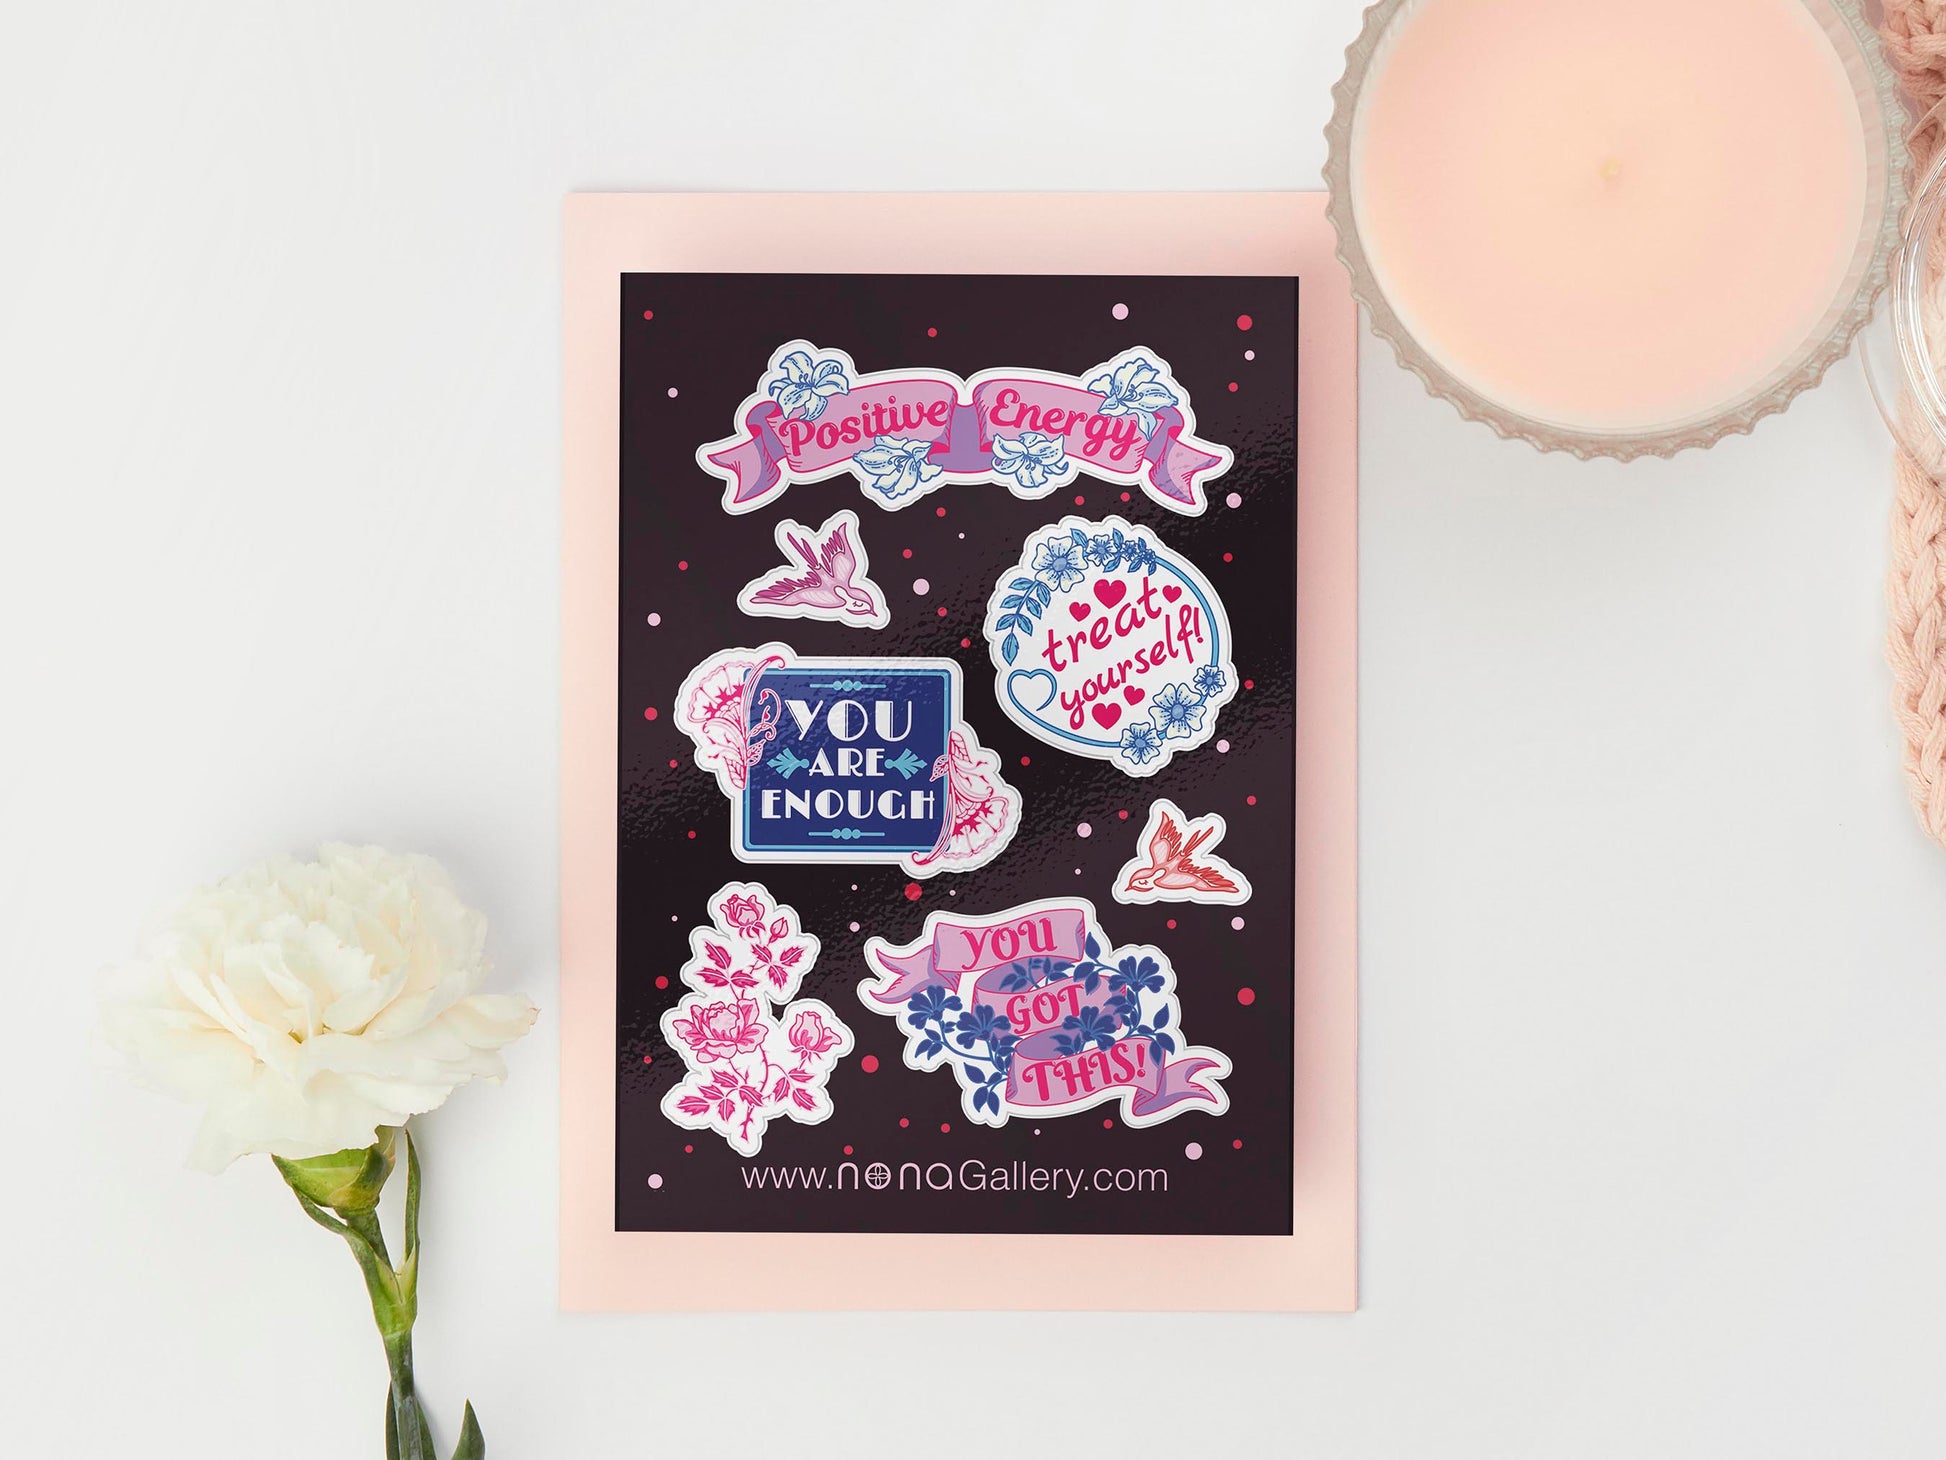 Large sticker sheet of digital illustration cartoons of various cute positive energy mental health themed quotes and patterns with birds and flowers